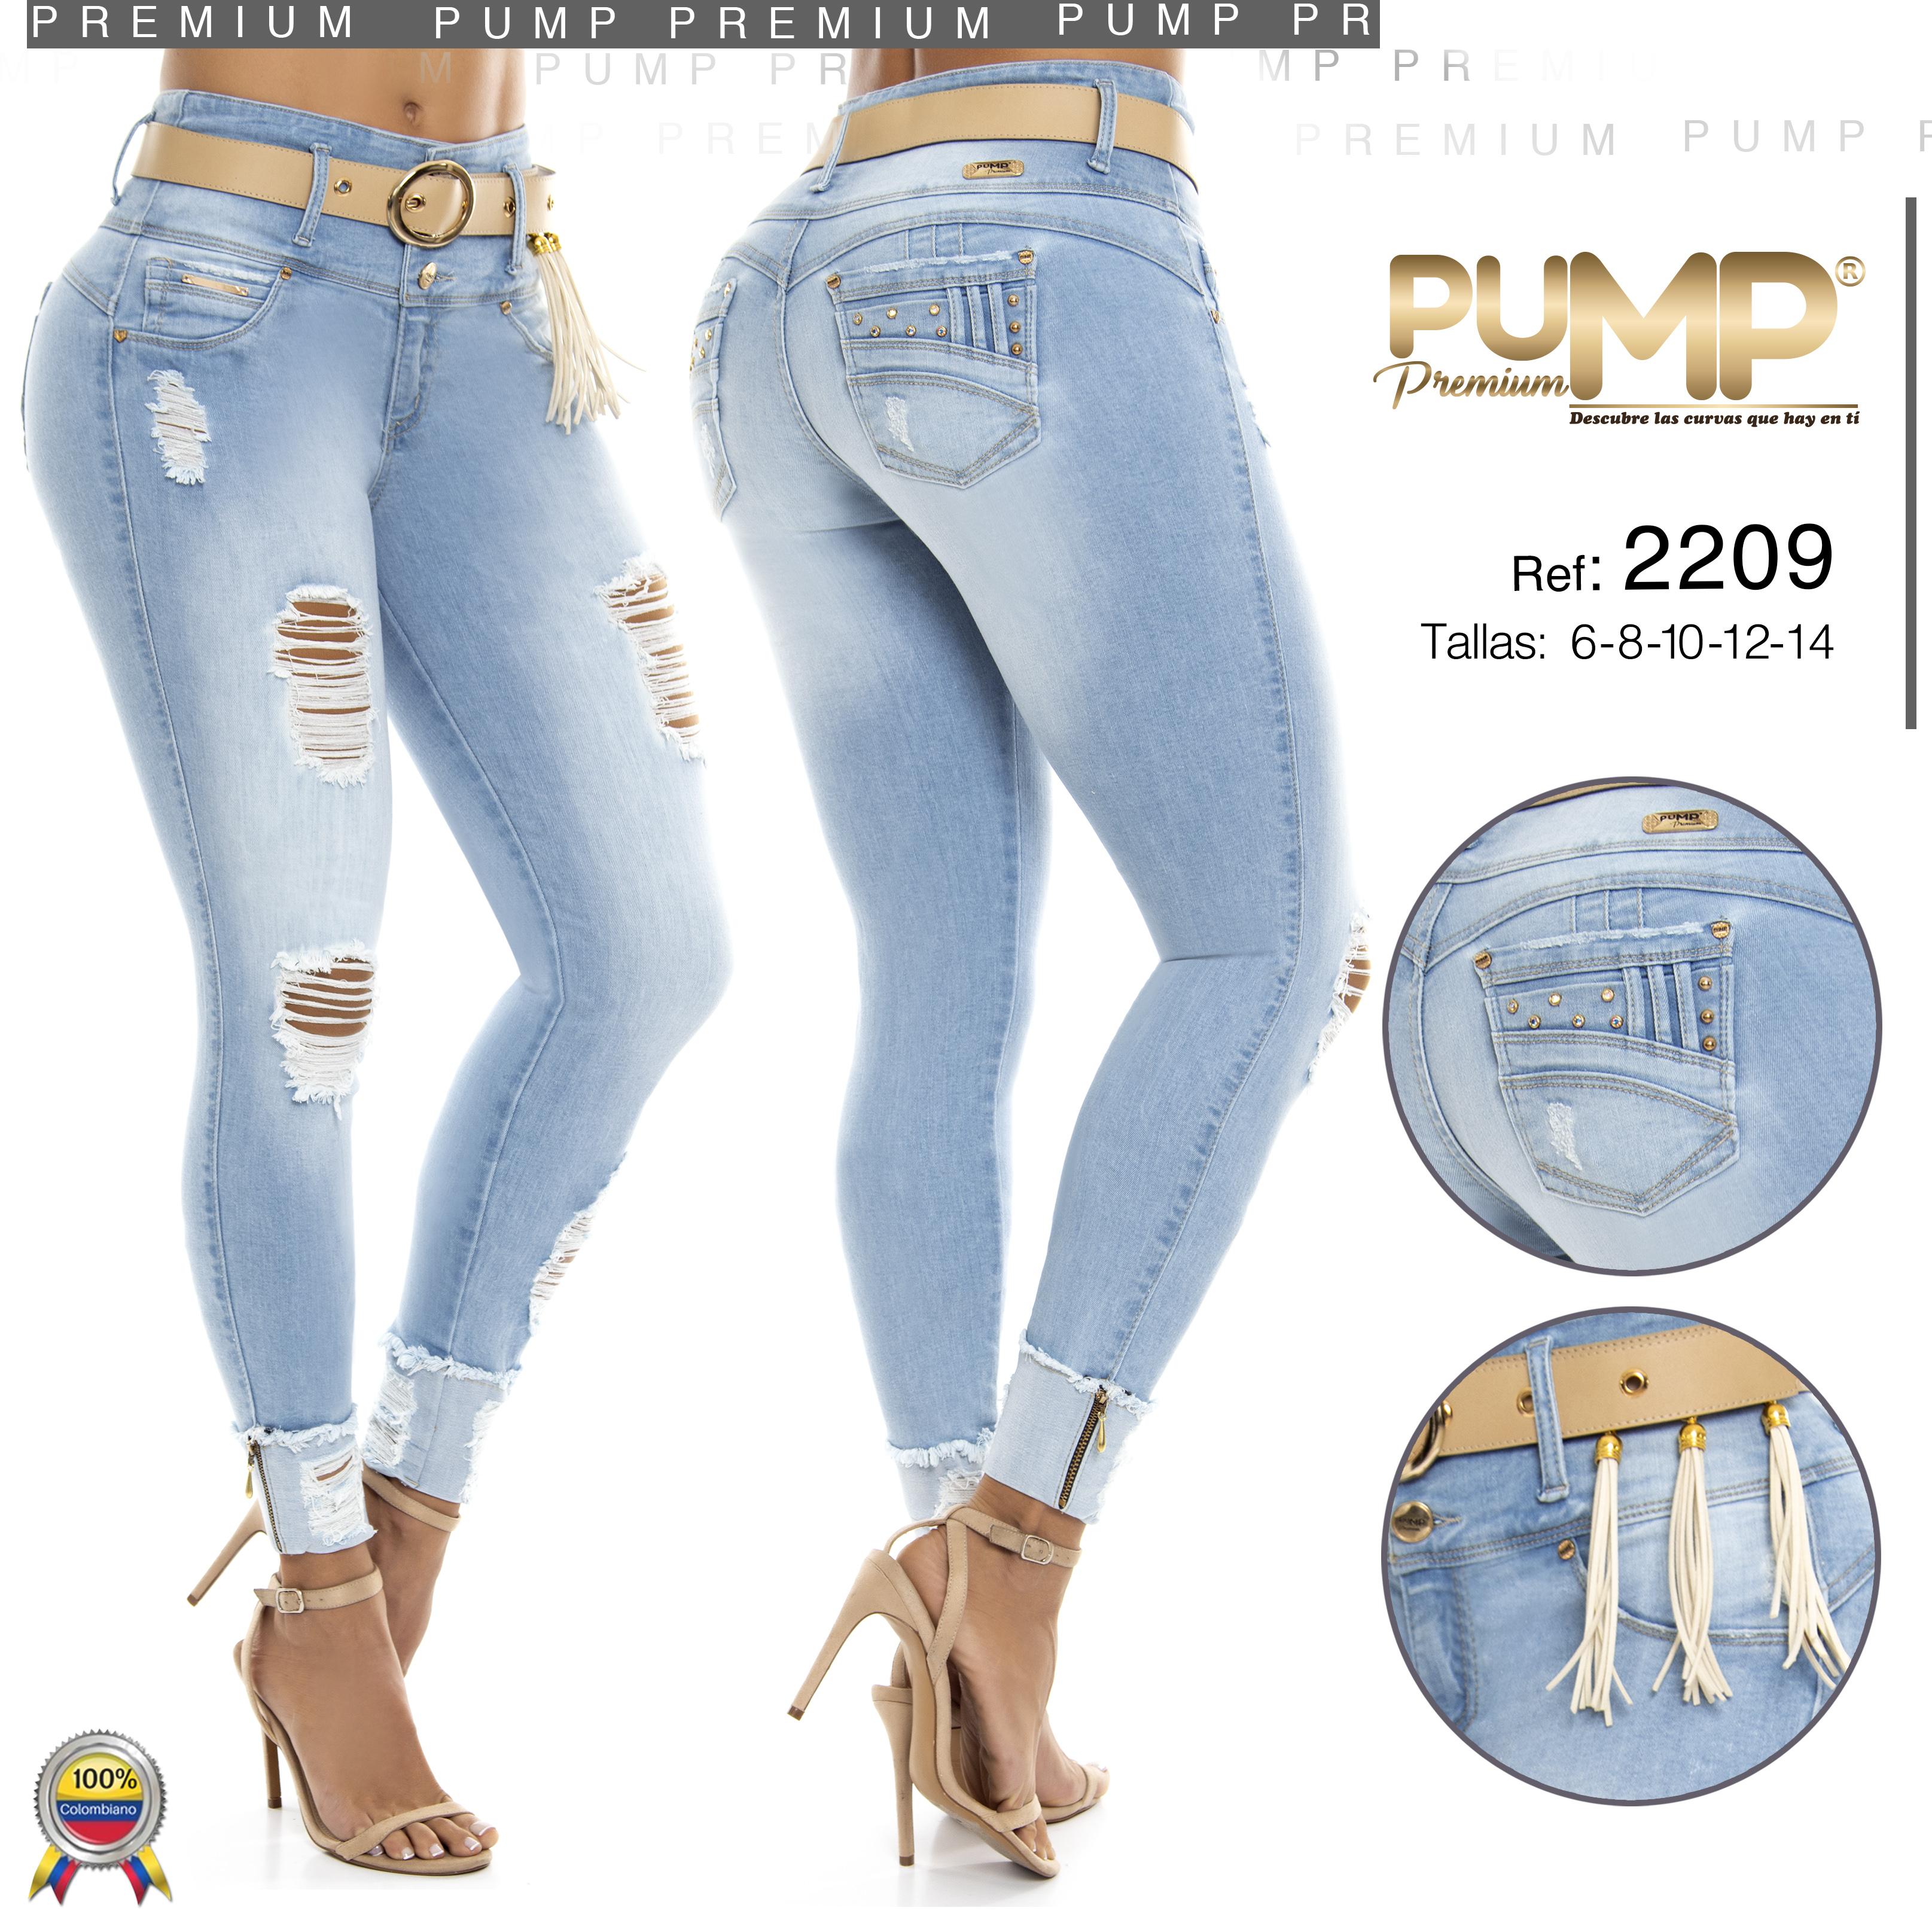 Colombian jeans push up fashion